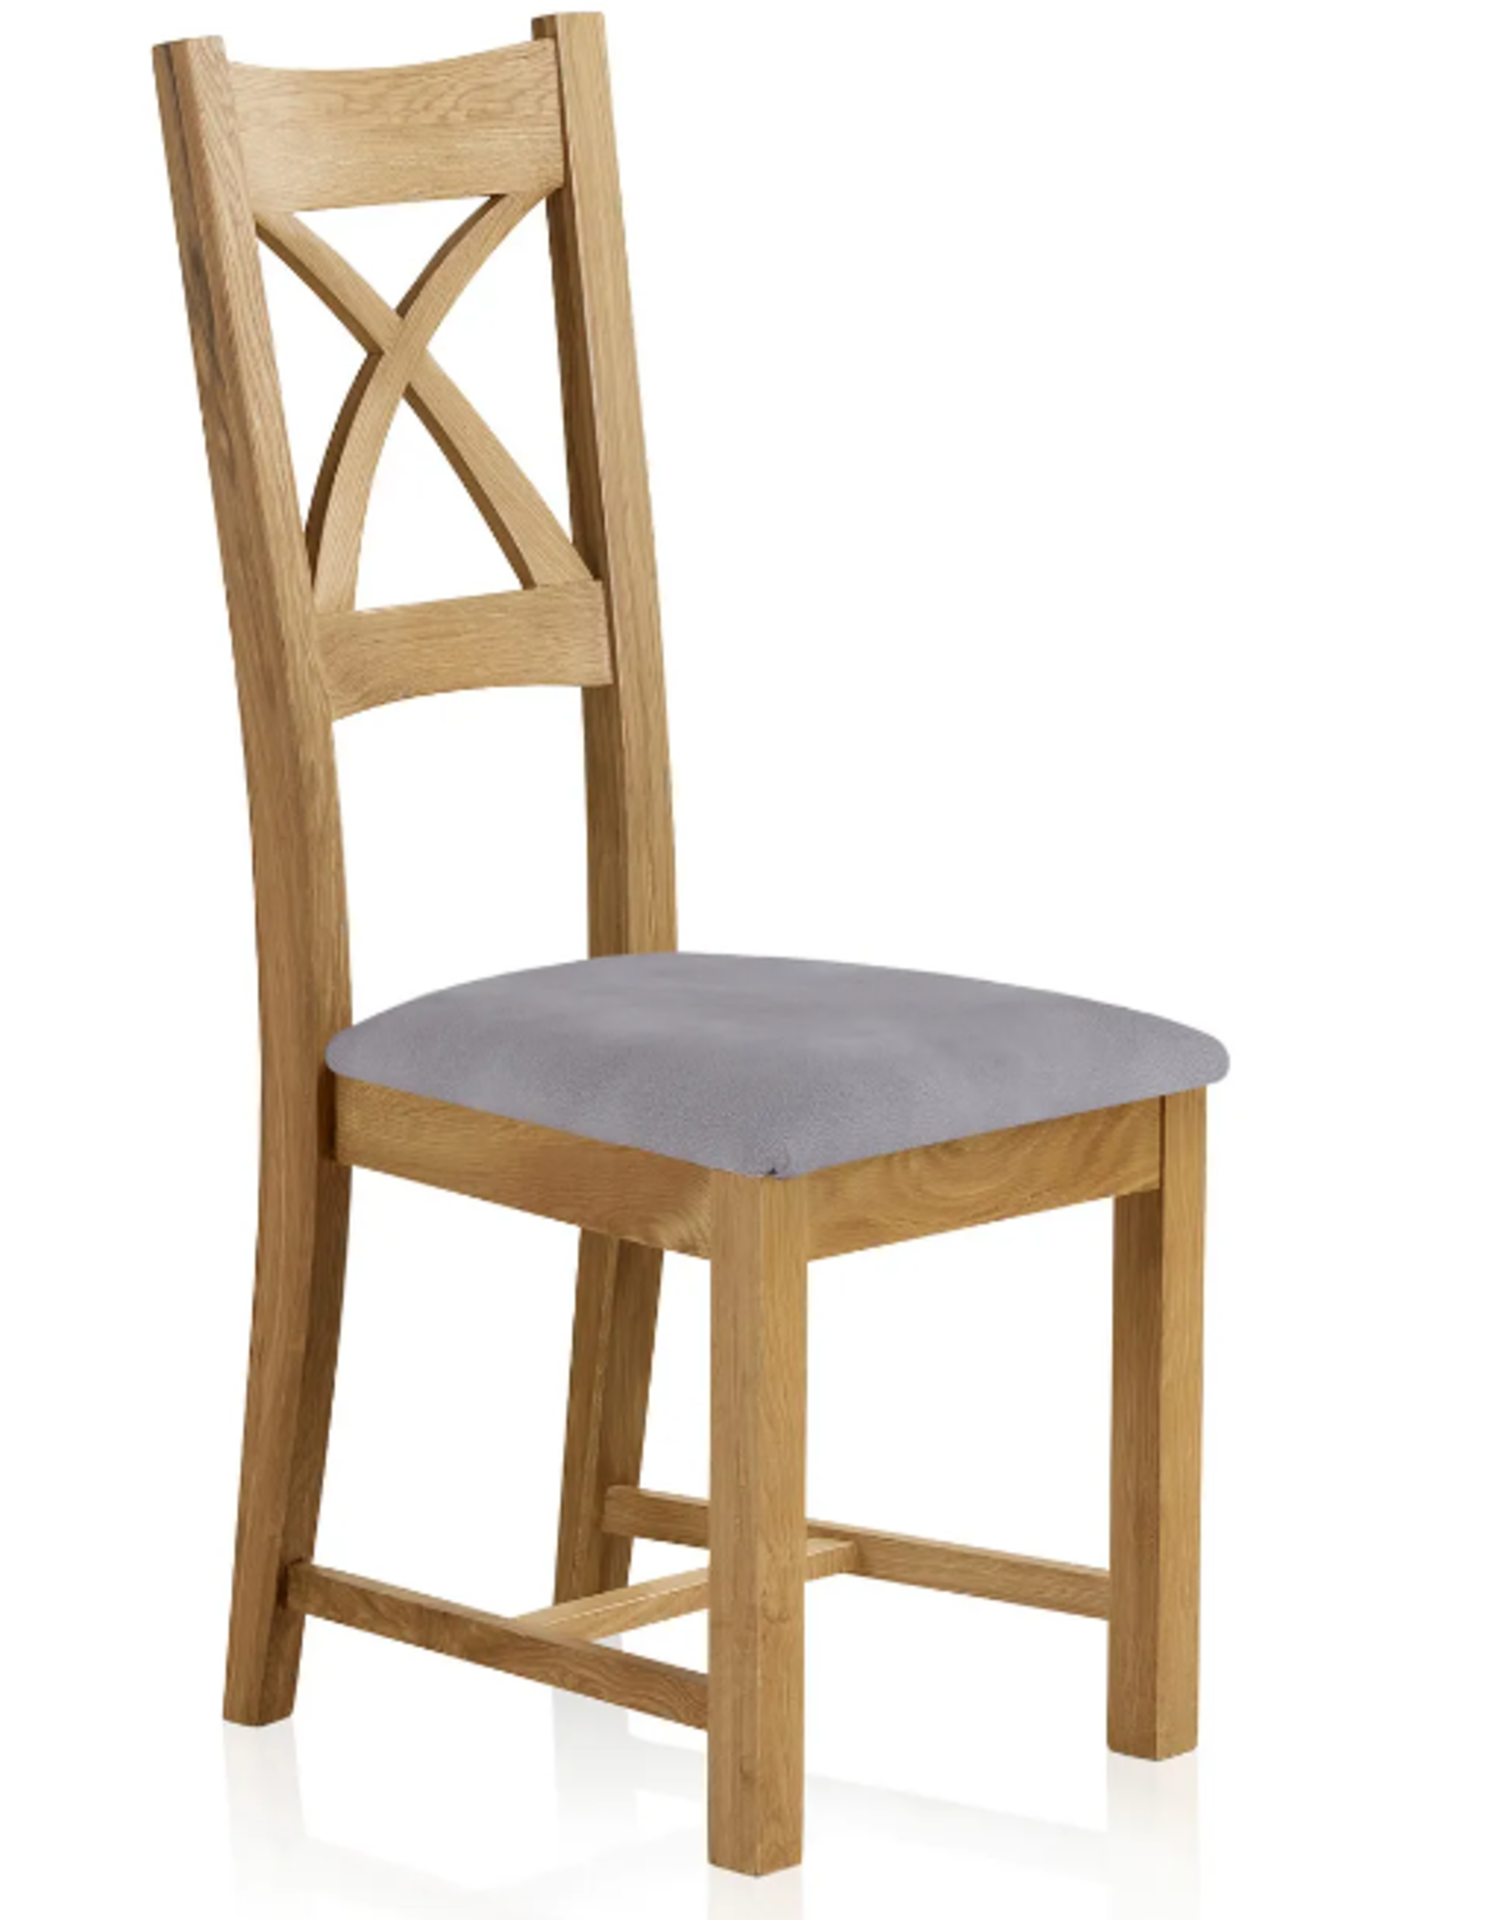 Pair of CROSS NATURAL OAK Dappled Dining Chair. *no seat pad*. RRP £195.00. Complete your dining